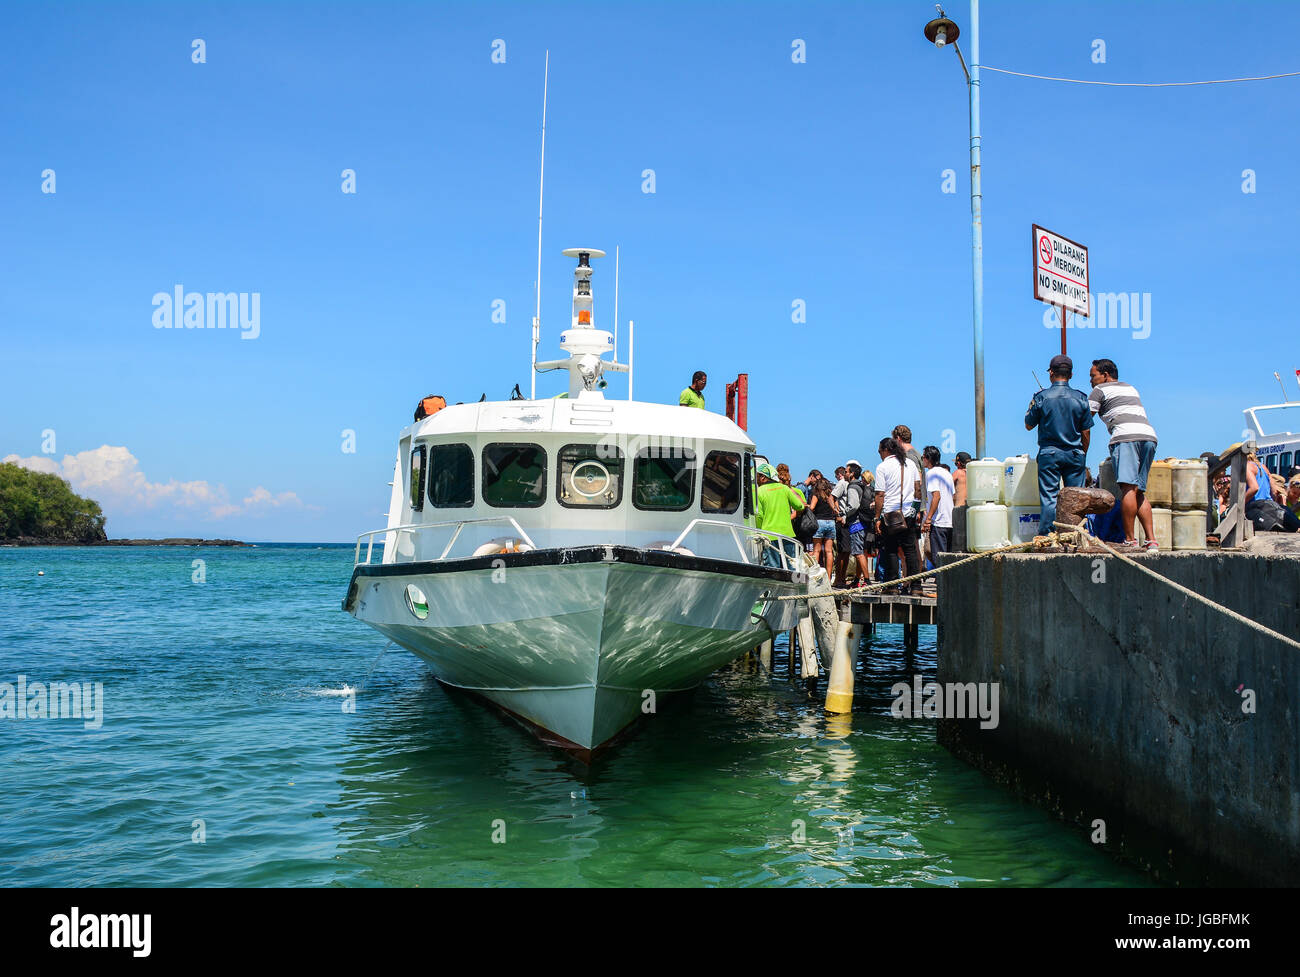 Bali, Indonesia - Apr 19, 2016. Passengers coming to the ferry in Bali Island, Indonesia. Bali is part of the Coral Triangle, the area with the highes Stock Photo